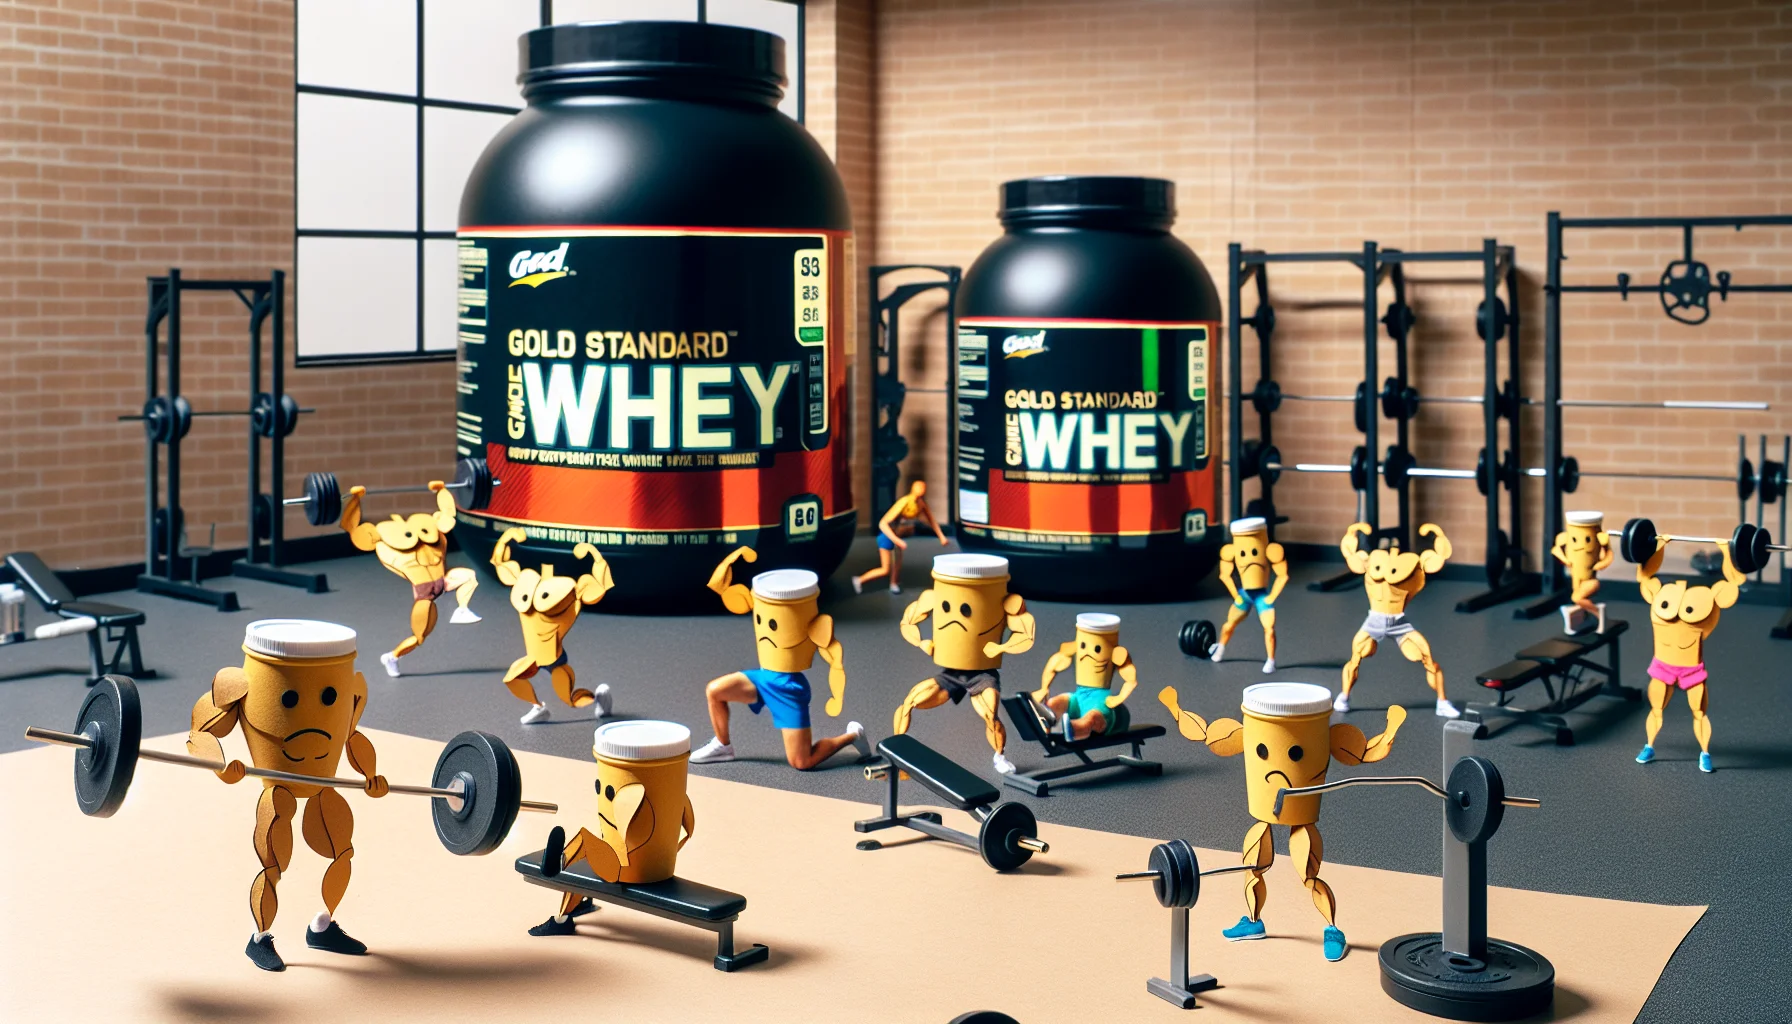 Create a whimsical scenario showing oversized gold standard whey protein containers from a generic wholesale store. They are interacting in a gym setting, with tiny cut-out muscular arms and legs, attempting to lift weights and do exercises as people would. Some containers are trying to use exercise machines, while others are engaged in cardio workouts. Additionally, some containers are cheerleaders, encouraging their fellow containers. This should elicit a chuckle and serve as an indirect recommendation for incorporating supplements in a sports regime.